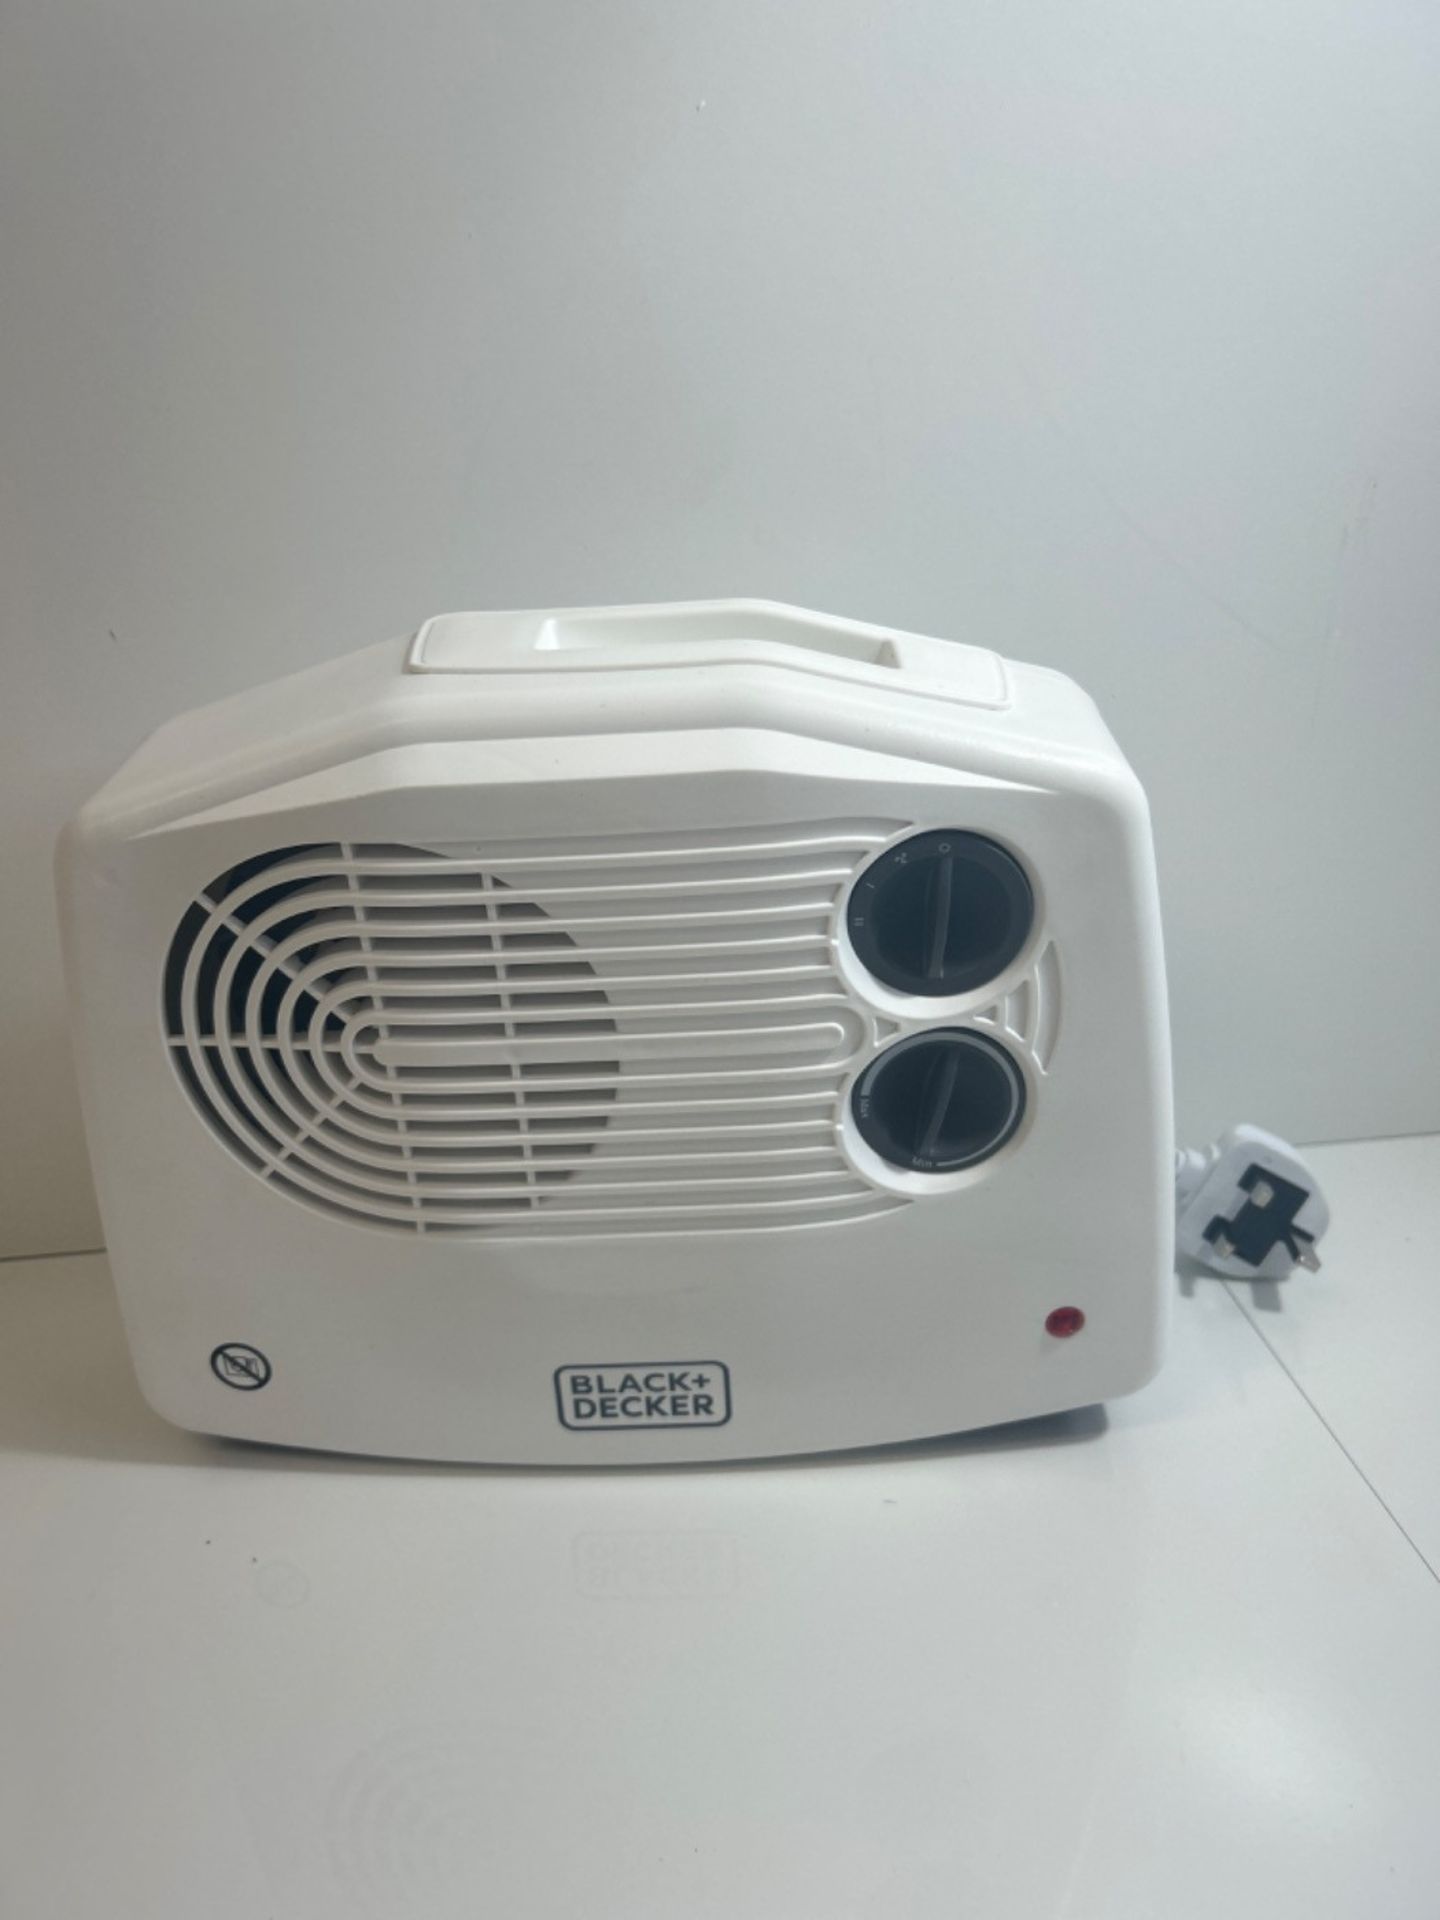 Black+Decker BXSH37006GB Fan Heater With Climate Control, 3Kw, White - Image 3 of 3